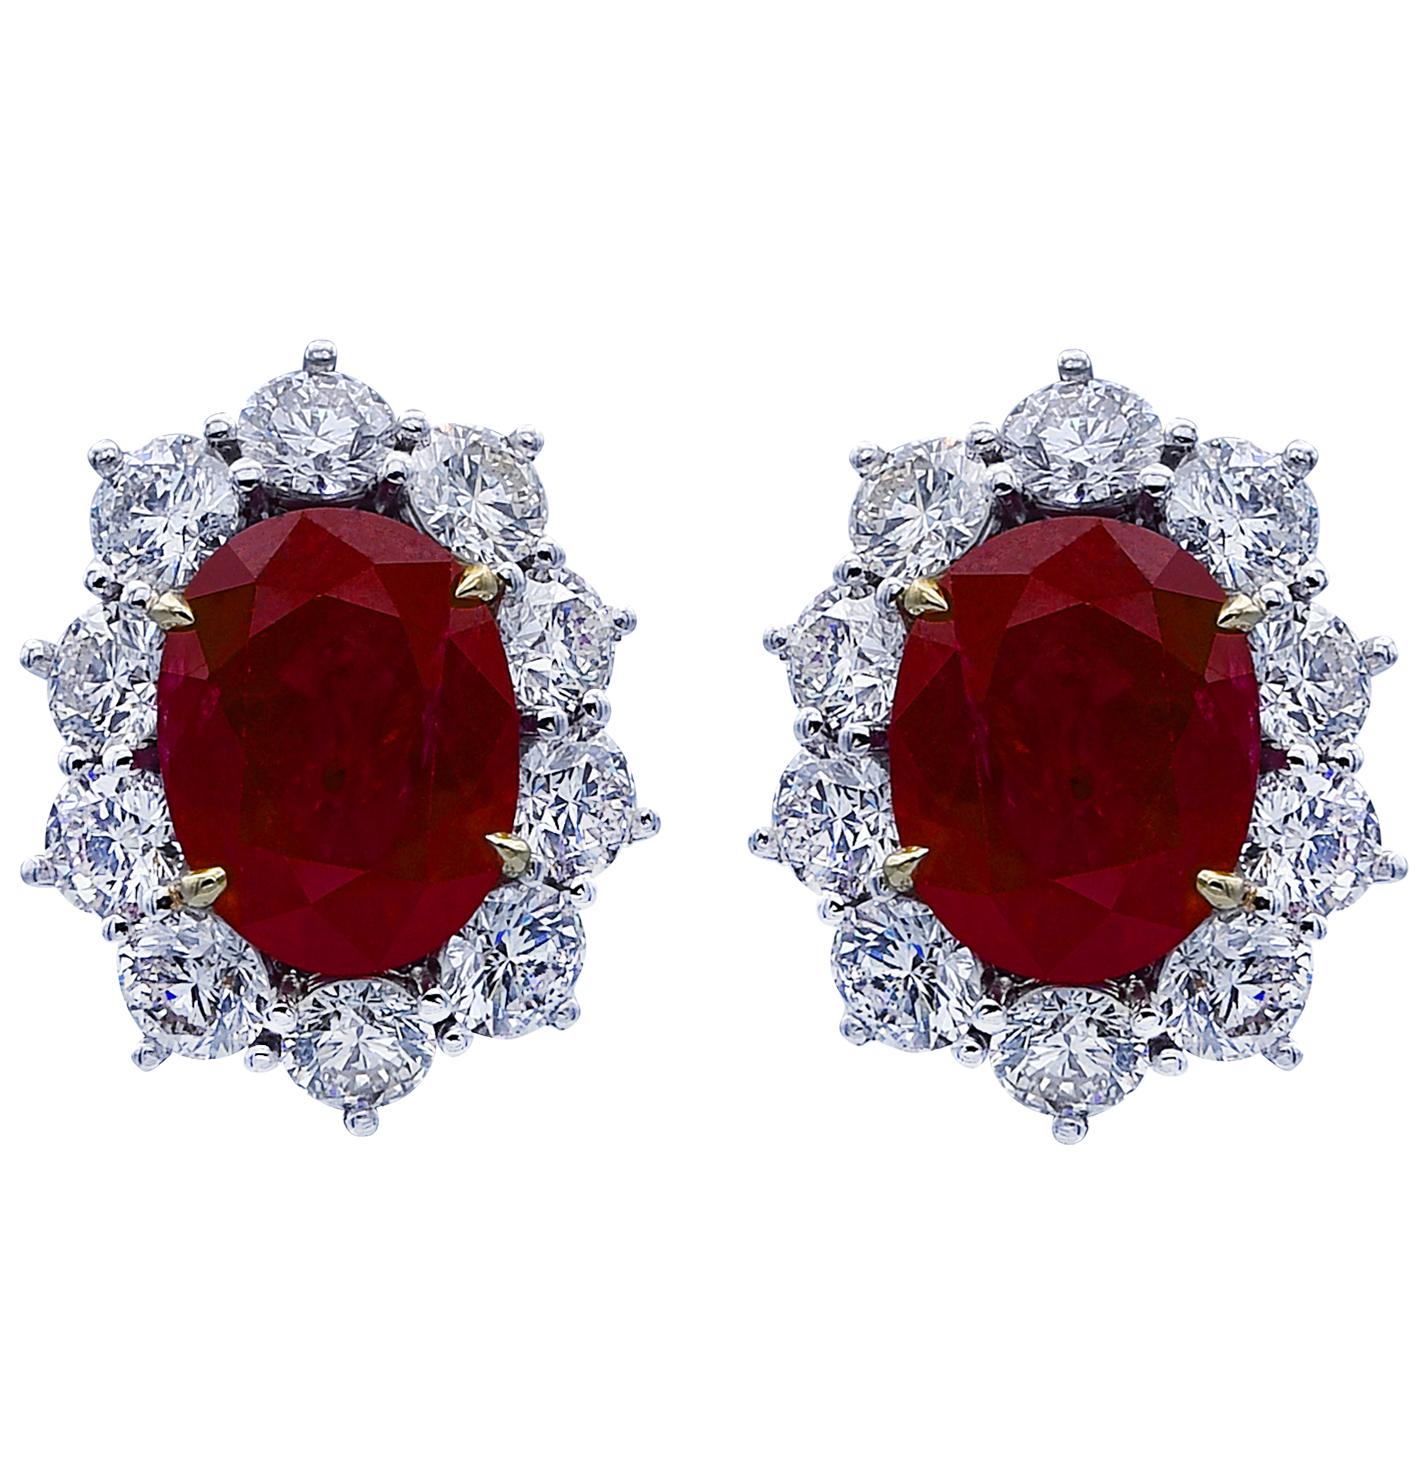 Vivid Diamonds AGL Certified 10.66 Carat Ruby and Diamond Earrings In New Condition For Sale In Miami, FL